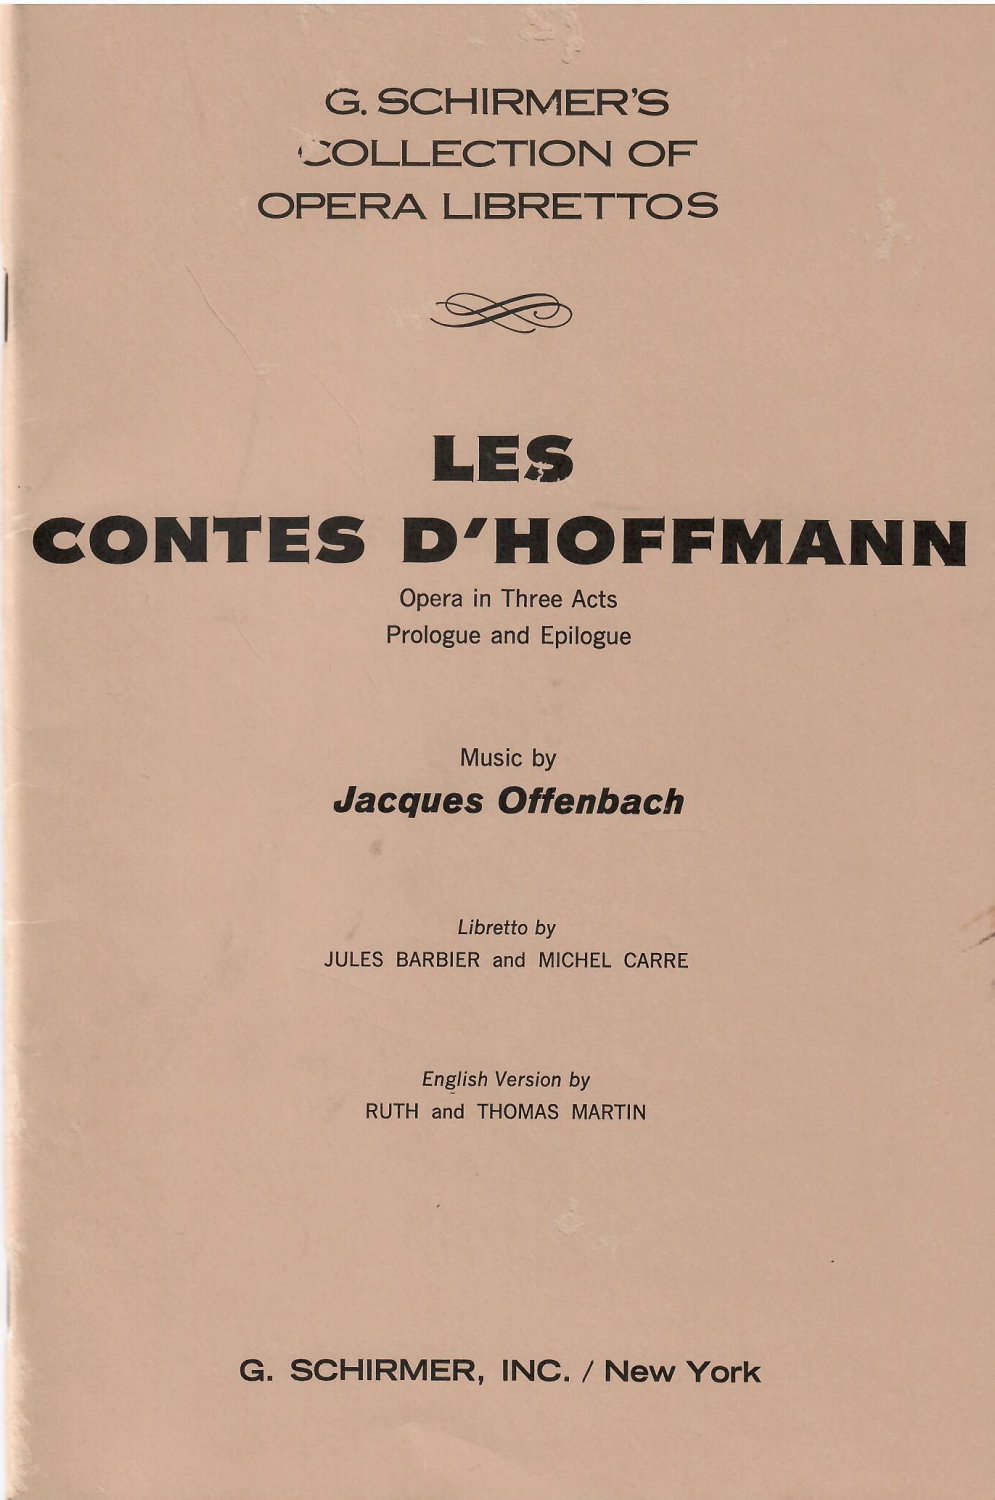 LES CONTES D'HOFFMANN Opera in Three Acts Prologue & Epilogue JACQUES OFFENBACH